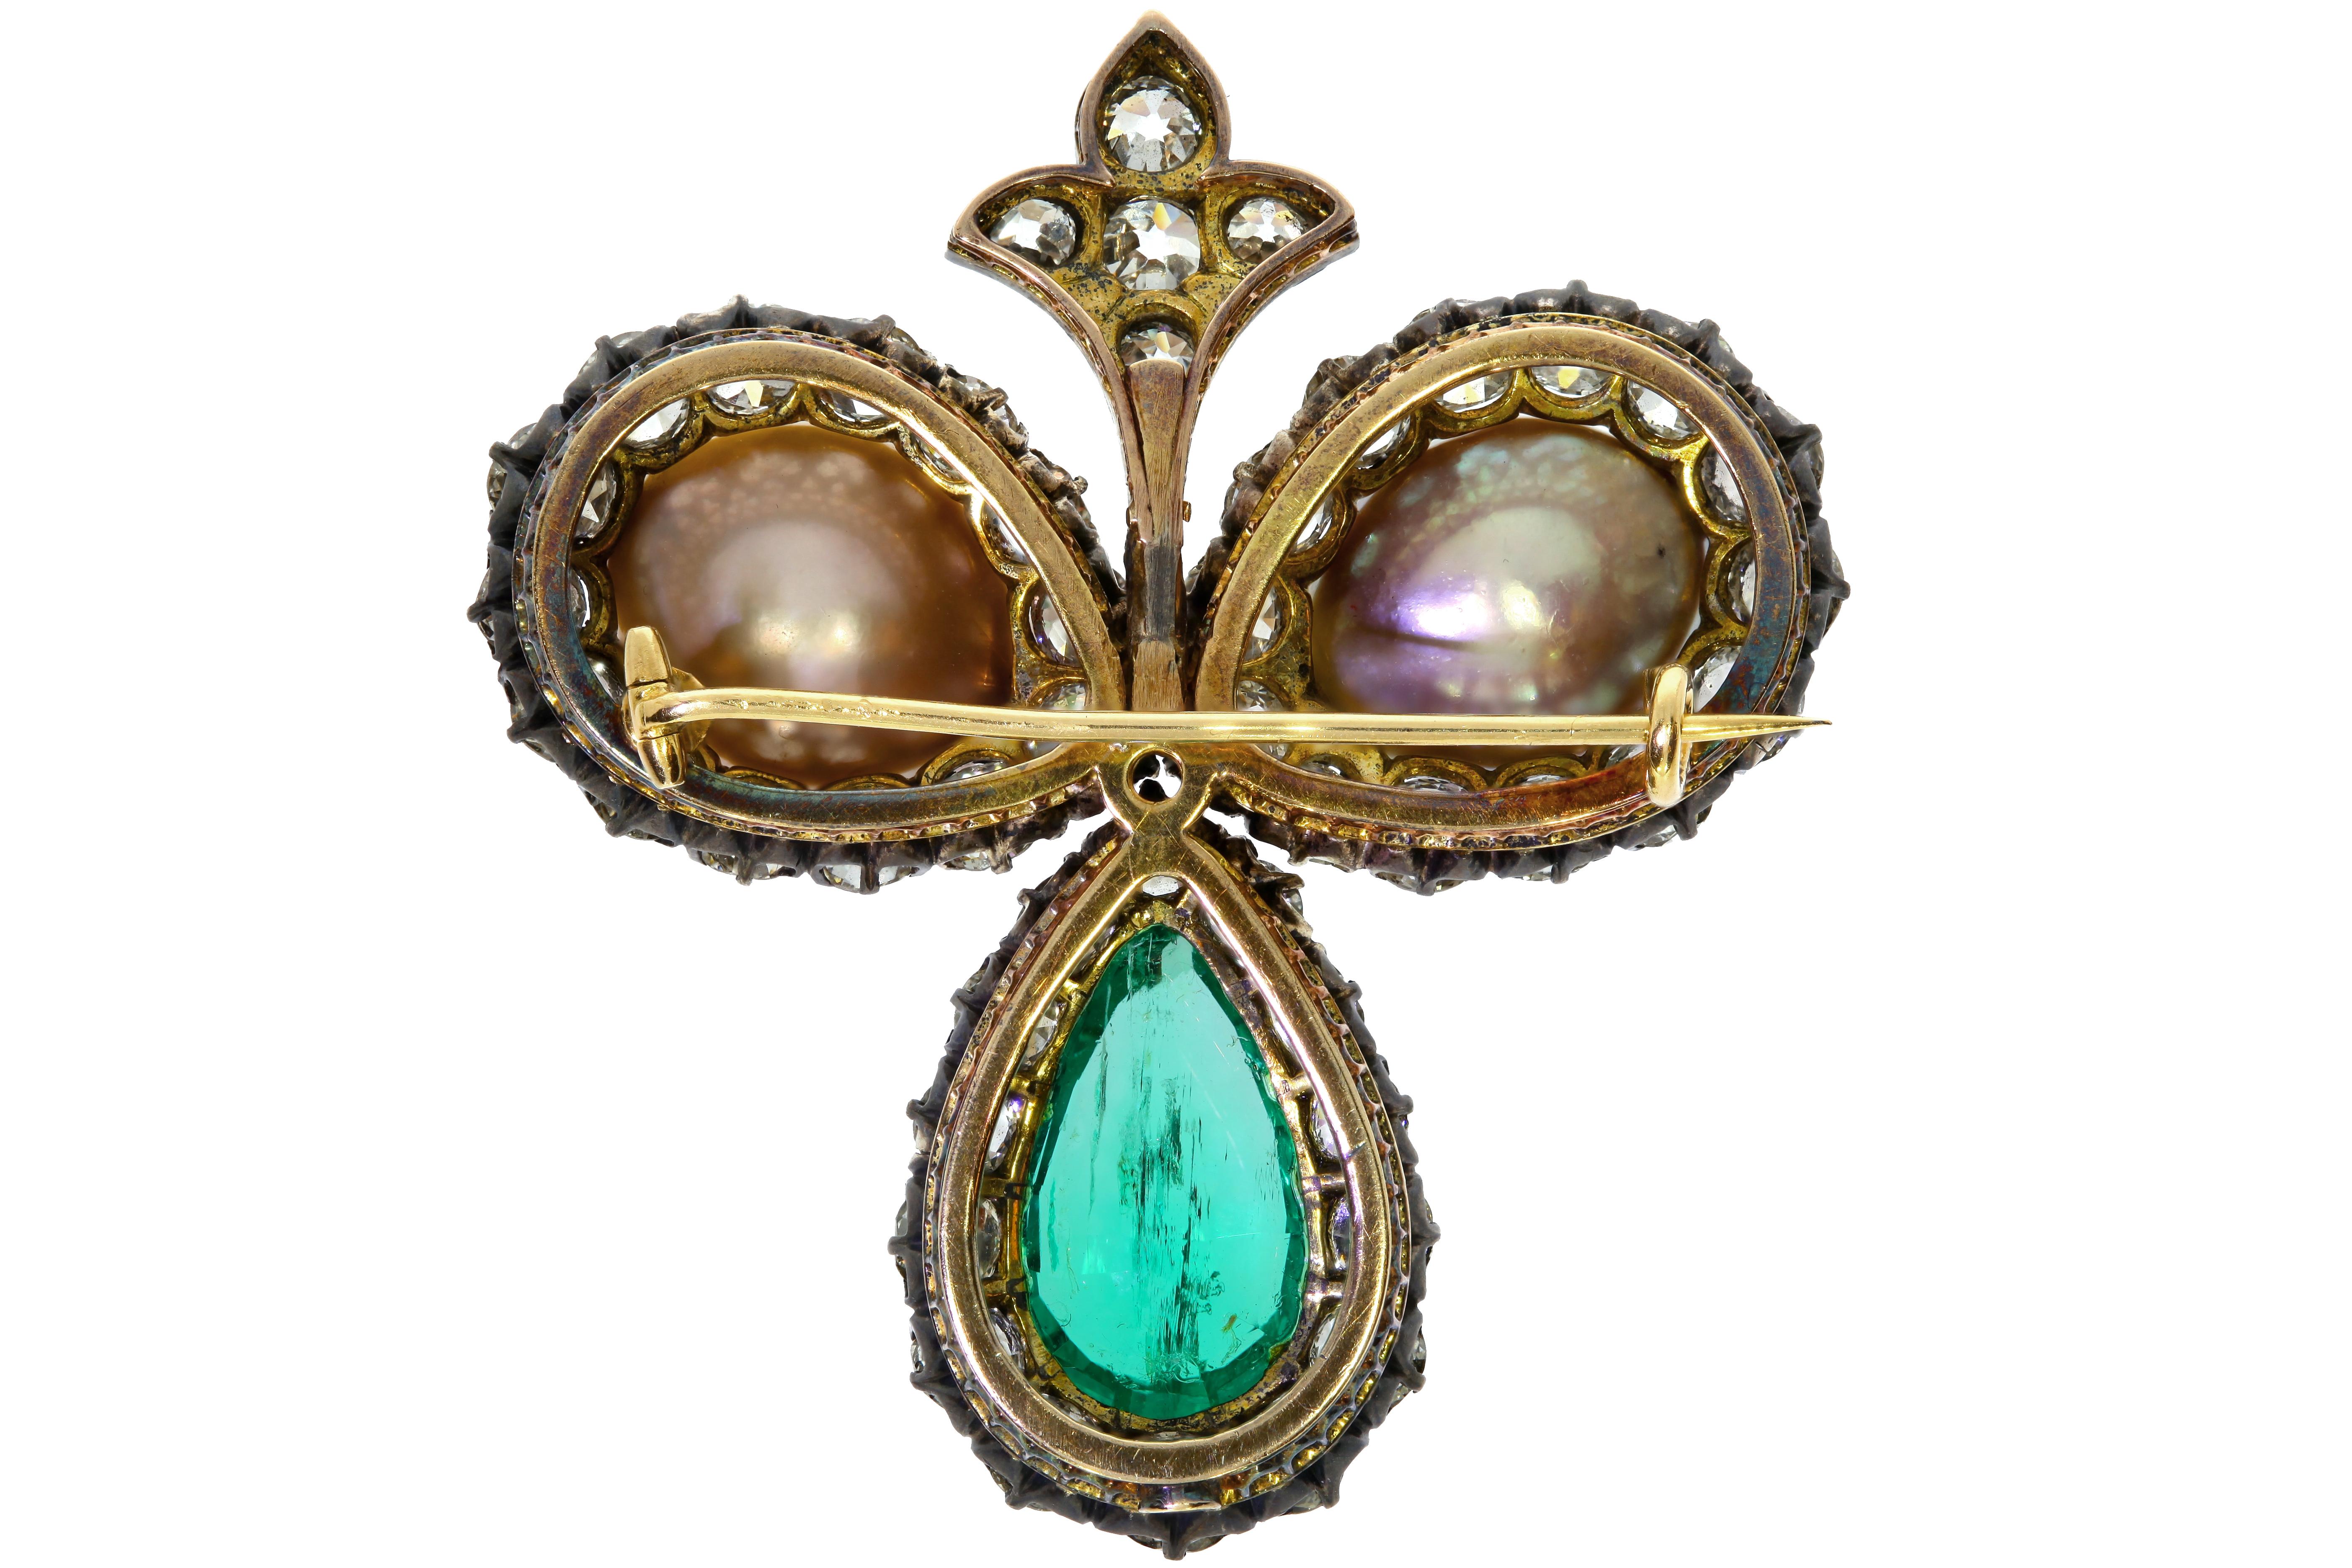 This Vintage brooch features two drilled pearls in a white and yellow metal brooch set with one 8.25 carats transparent, green, pear shaped emerald. Consists of one light gray natural and one cream colored pearl, as well as numerous transparent near